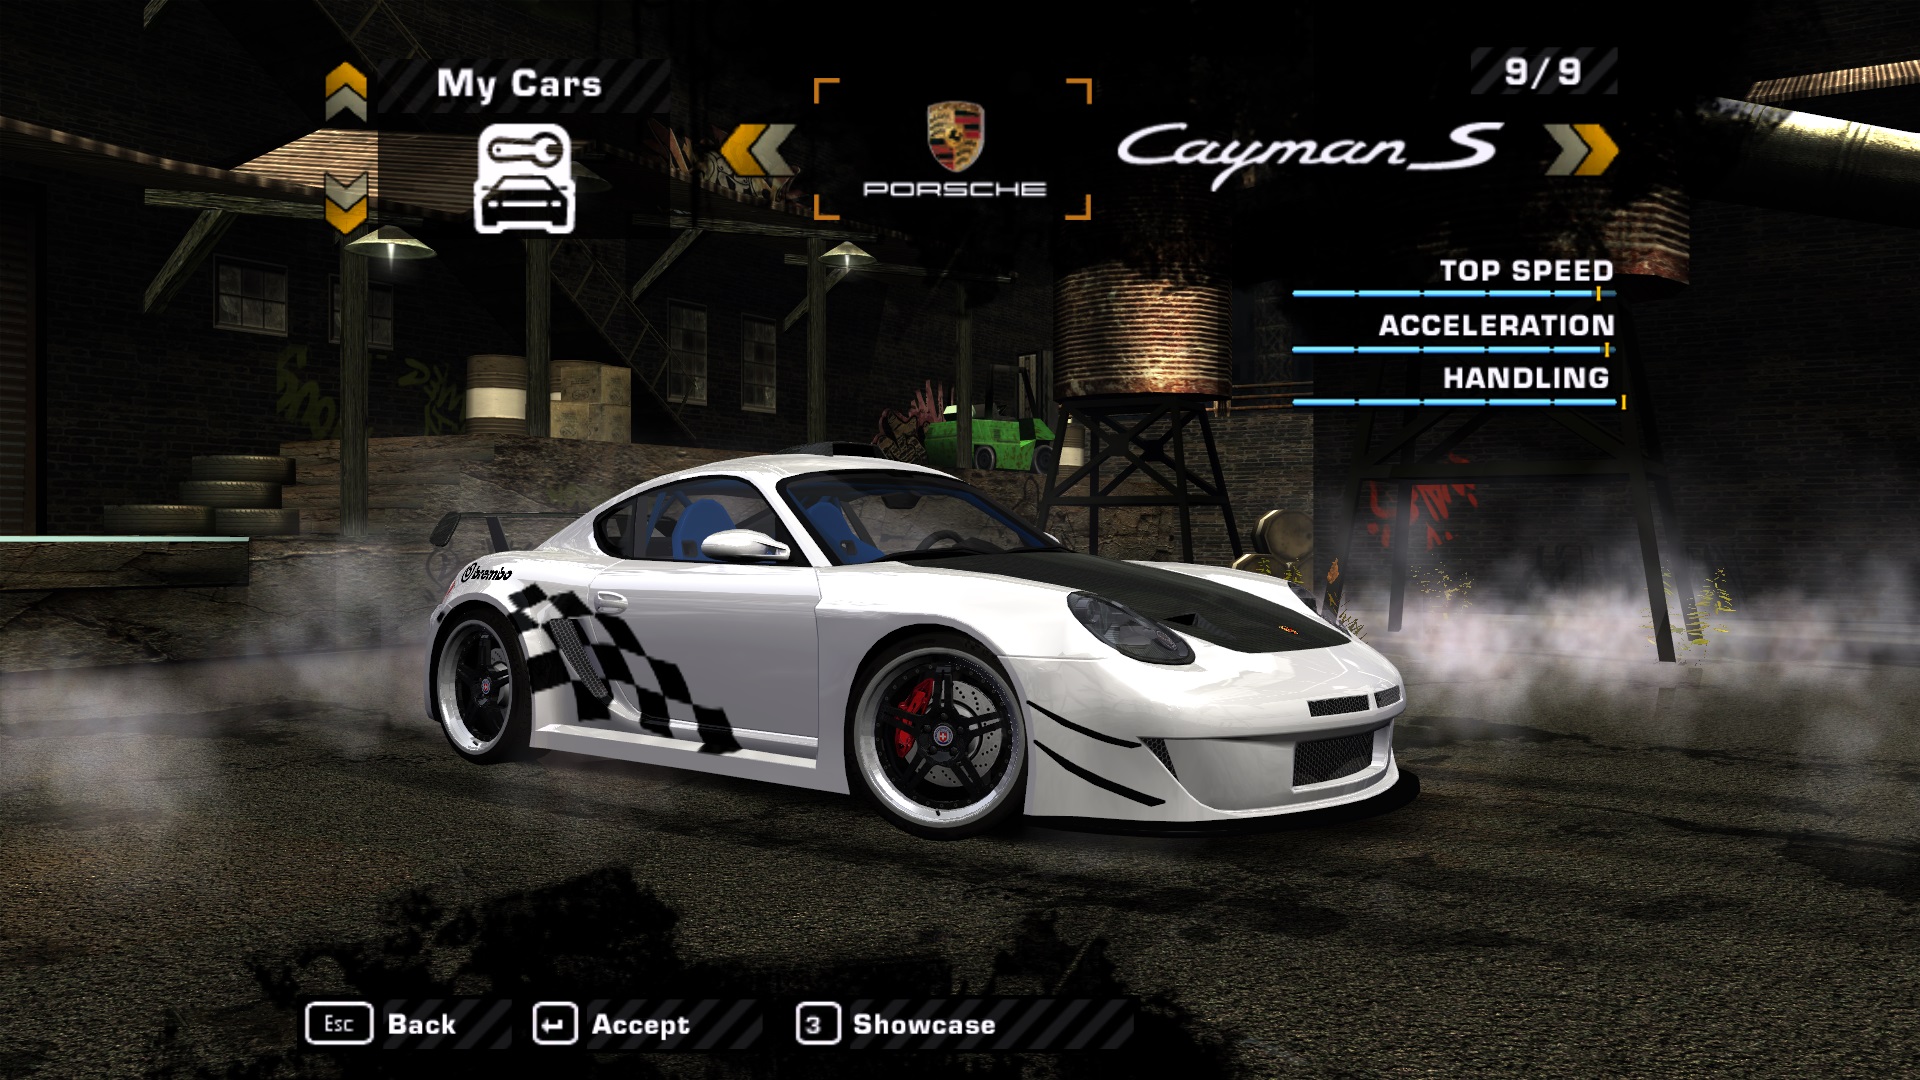 Need For Speed Most Wanted Porsche Cayman S Model Update (OUTDATED)